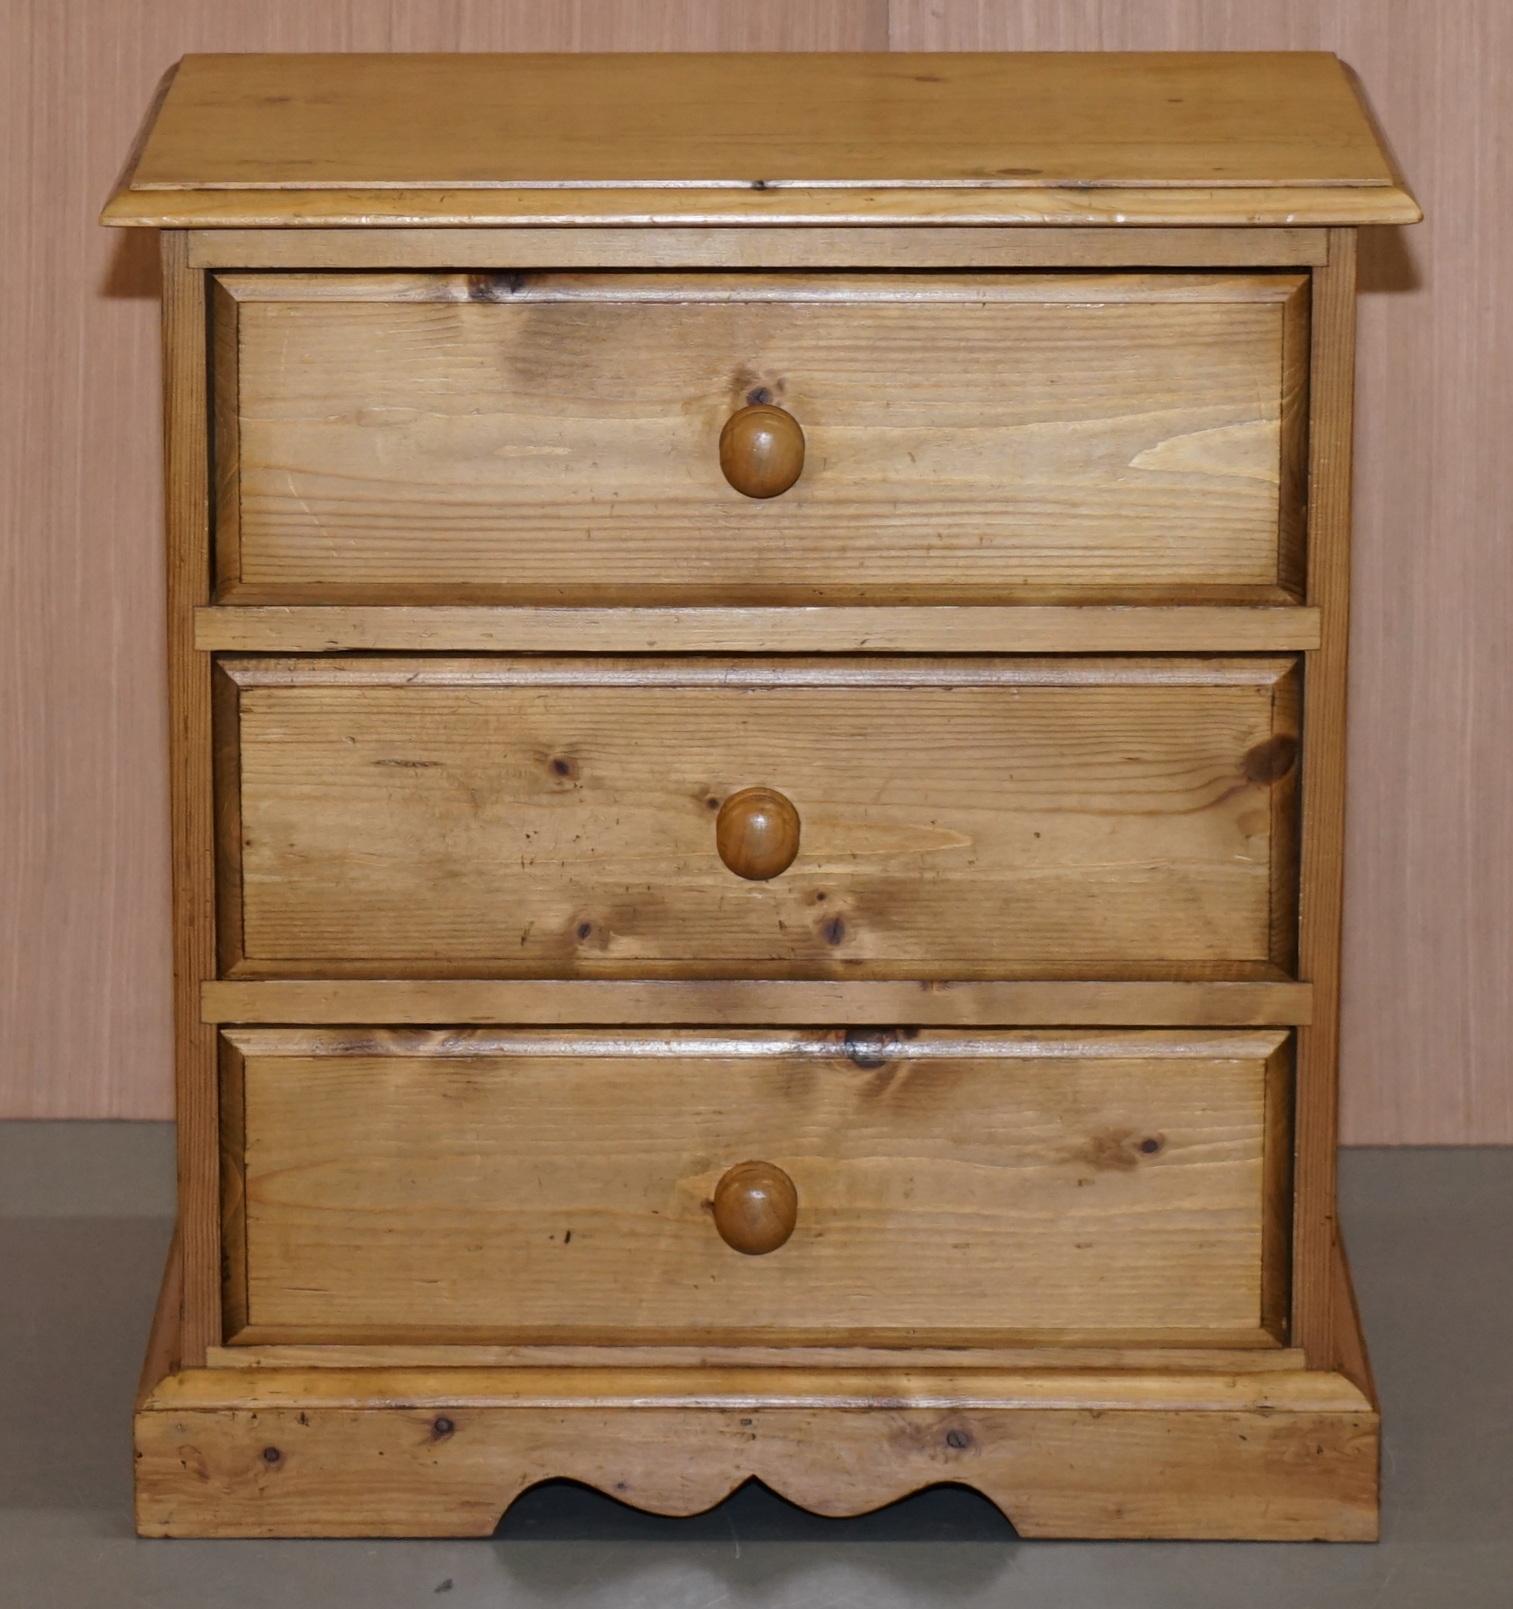 We are delighted to offer for sale this stunning vintage circa 1960s English oak bedside table sized chest of drawers

This piece is part of a suite, the other pieces are all Victorian and listed under my other items

This little chest of